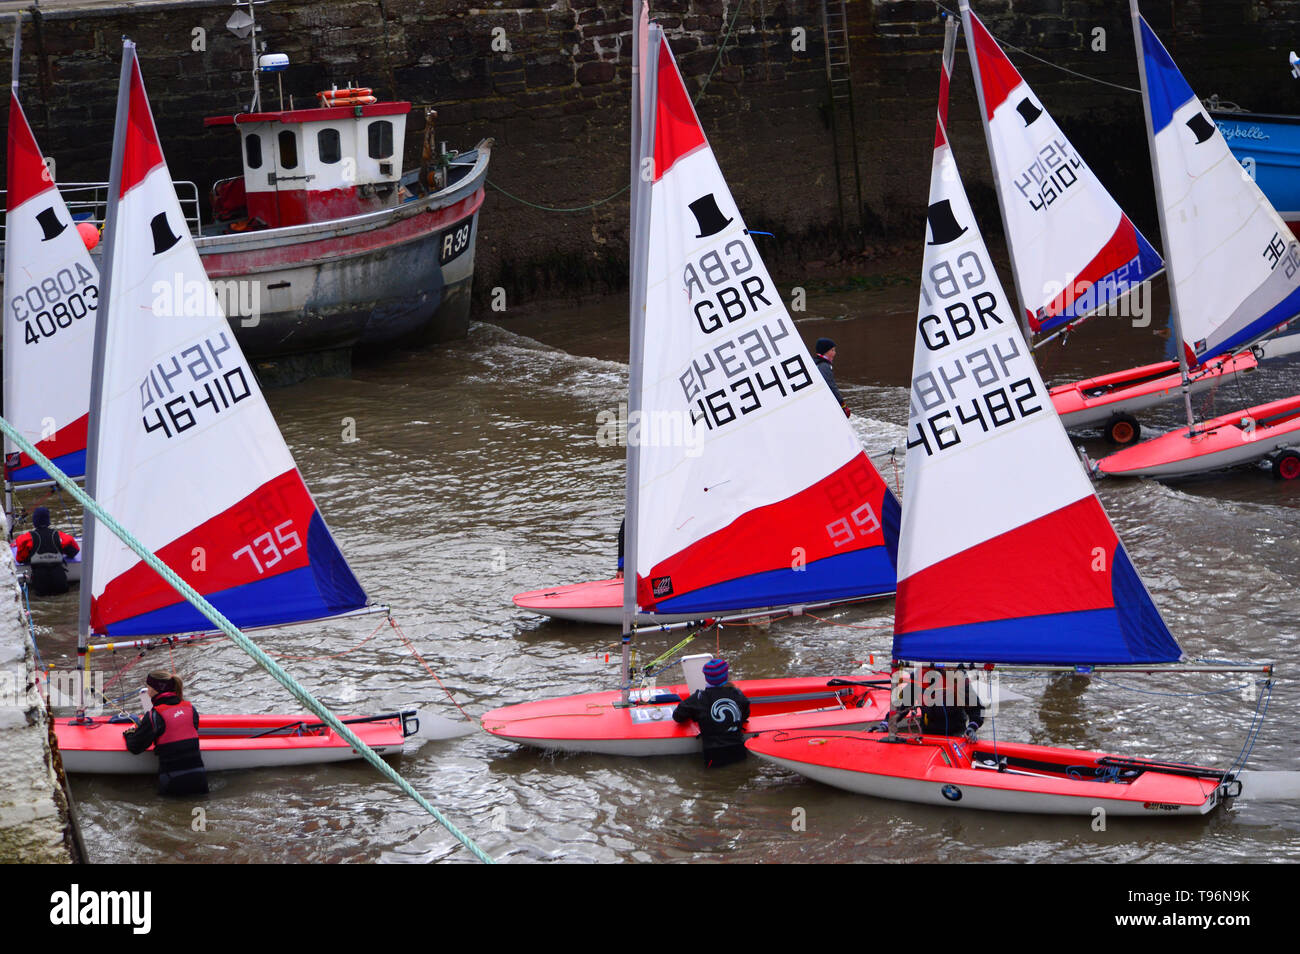 Topper sailing dinghies launching from Paignton Hrbour, prior to their Regional Training Squad Session and Competition on Sundy, April 27, 2014. Stock Photo